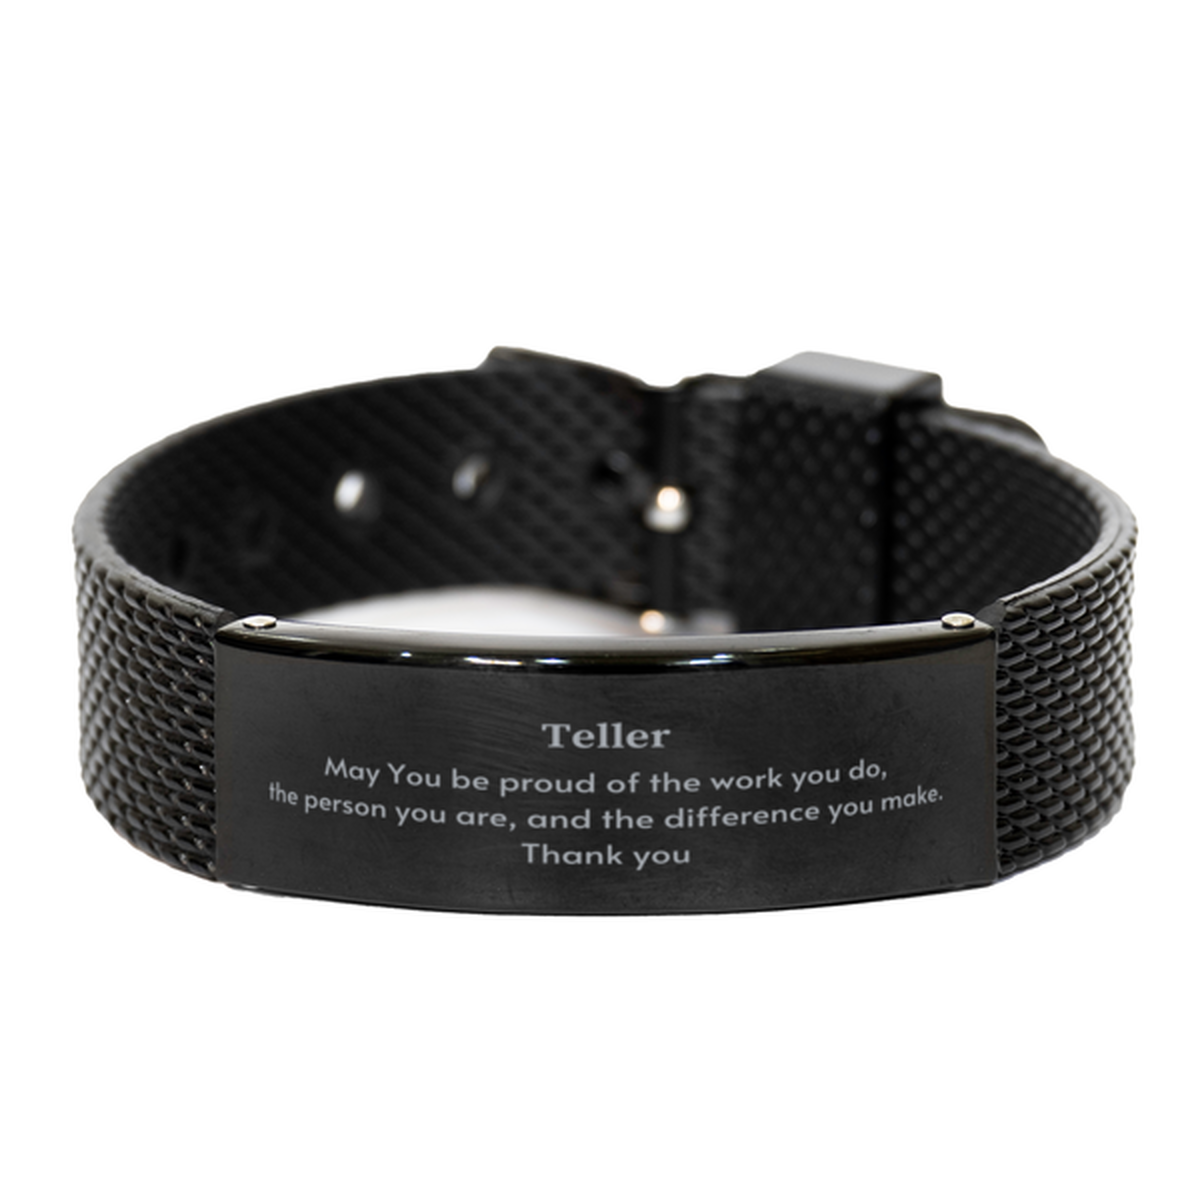 Heartwarming Black Shark Mesh Bracelet Retirement Coworkers Gifts for Teller, Teller May You be proud of the work you do, the person you are Gifts for Boss Men Women Friends